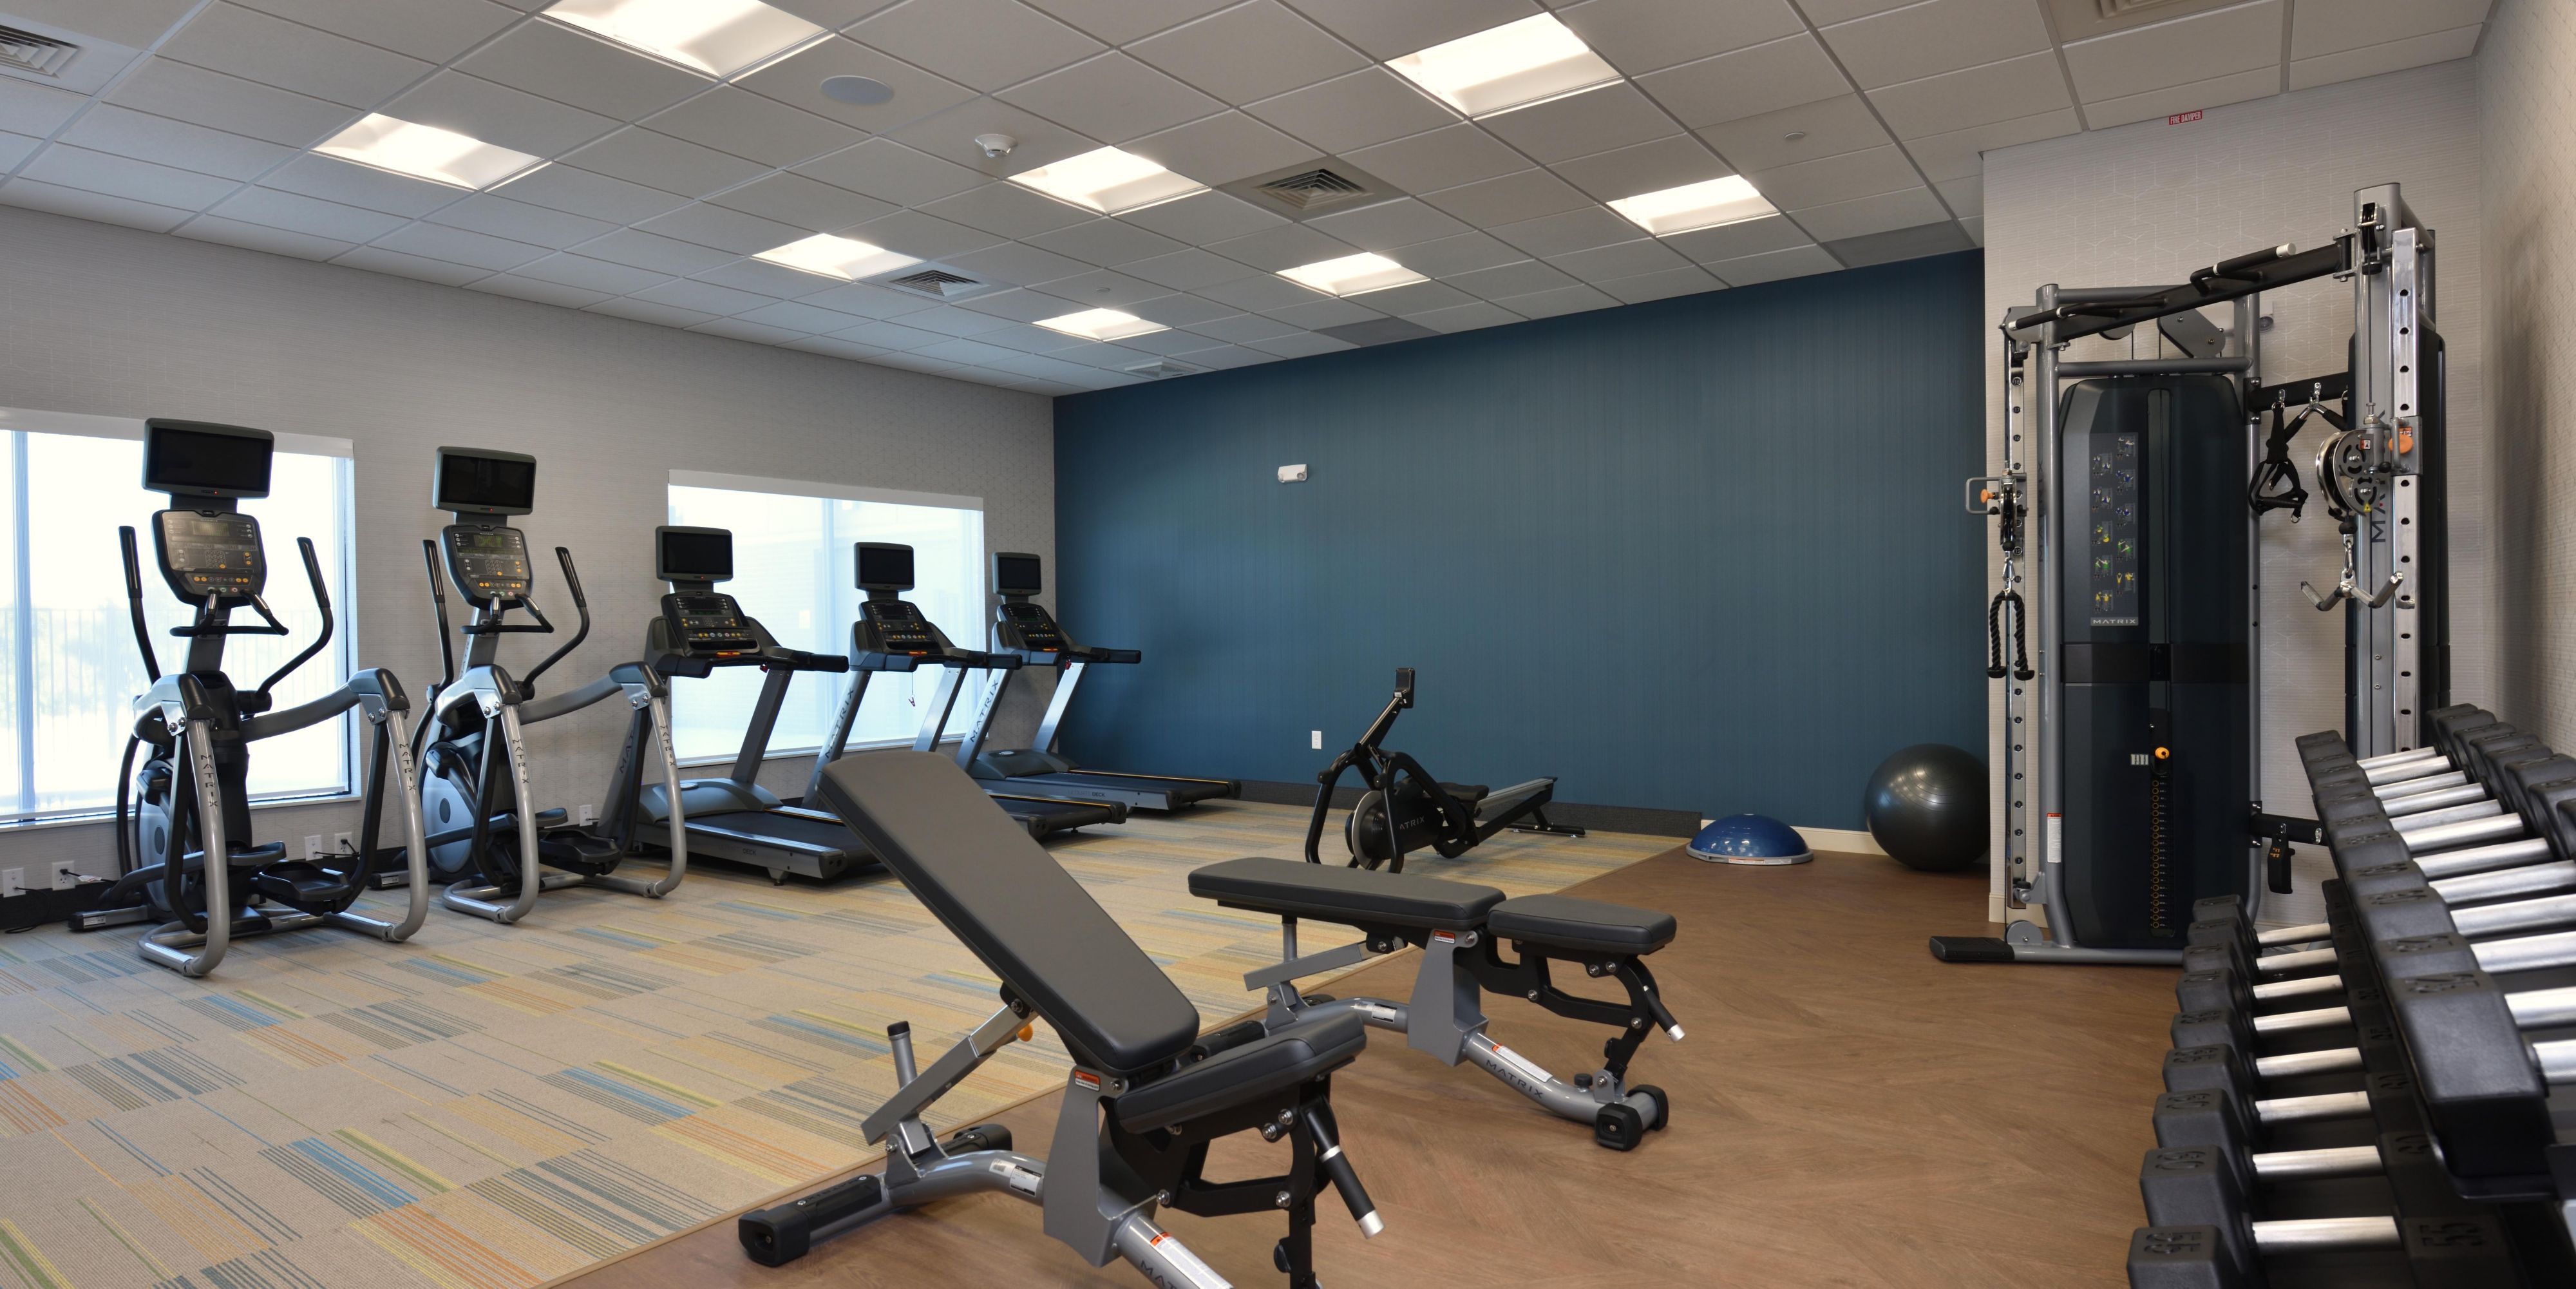 Maintaining your routine while traveling is important, especially when you’re short on time and on the go. We get it. The right workout—right when you want it—helps you stay focused, energized and on top of your game. With a range of cardiovascular equipment and free weights, our 24-hour workout facility will meet all of your needs.